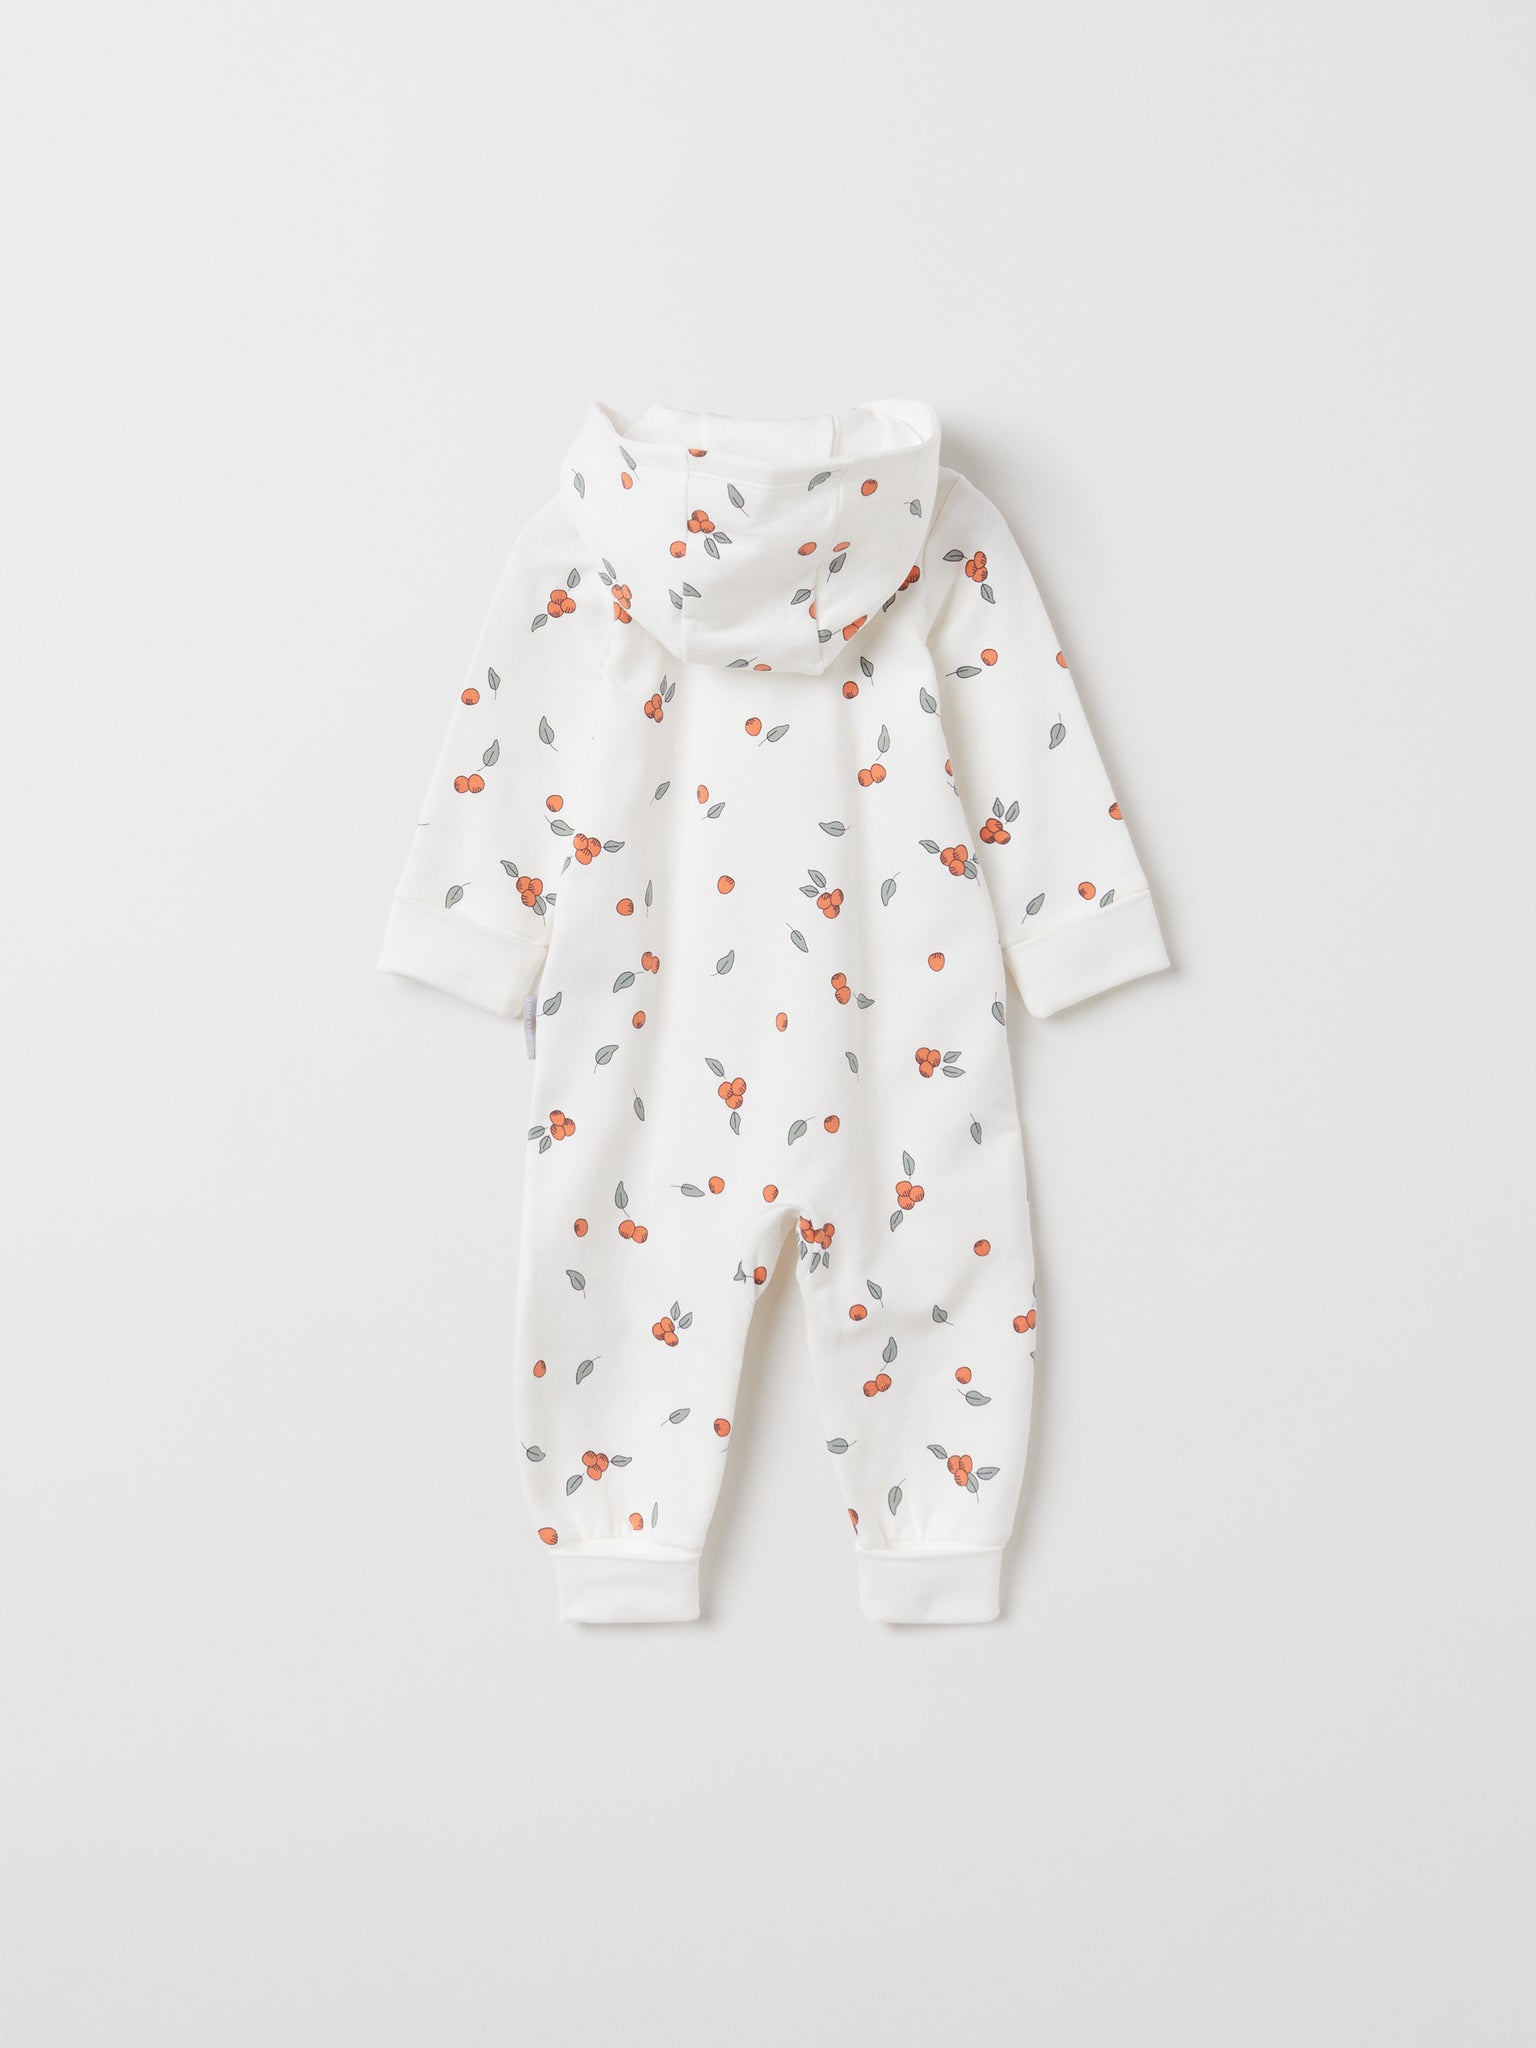 Berry Print Cotton Baby All-In-One from the Polarn O. Pyret baby collection. Clothes made using sustainably sourced materials.